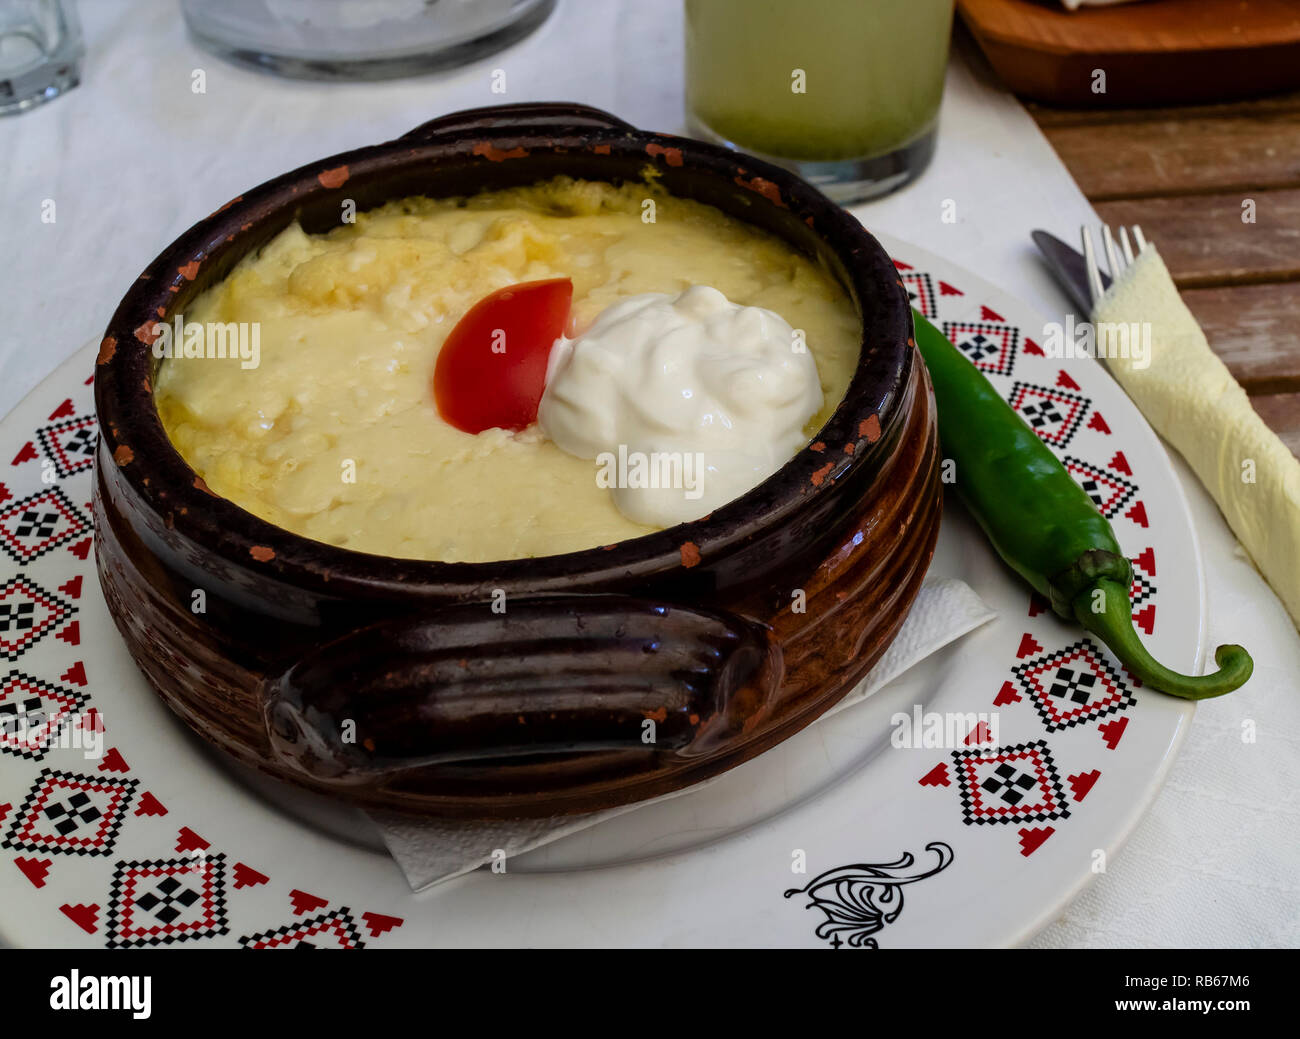 Mamaliga, a romanian traditional dish made of polenta, served with sour cream and a slice of tomato Stock Photo